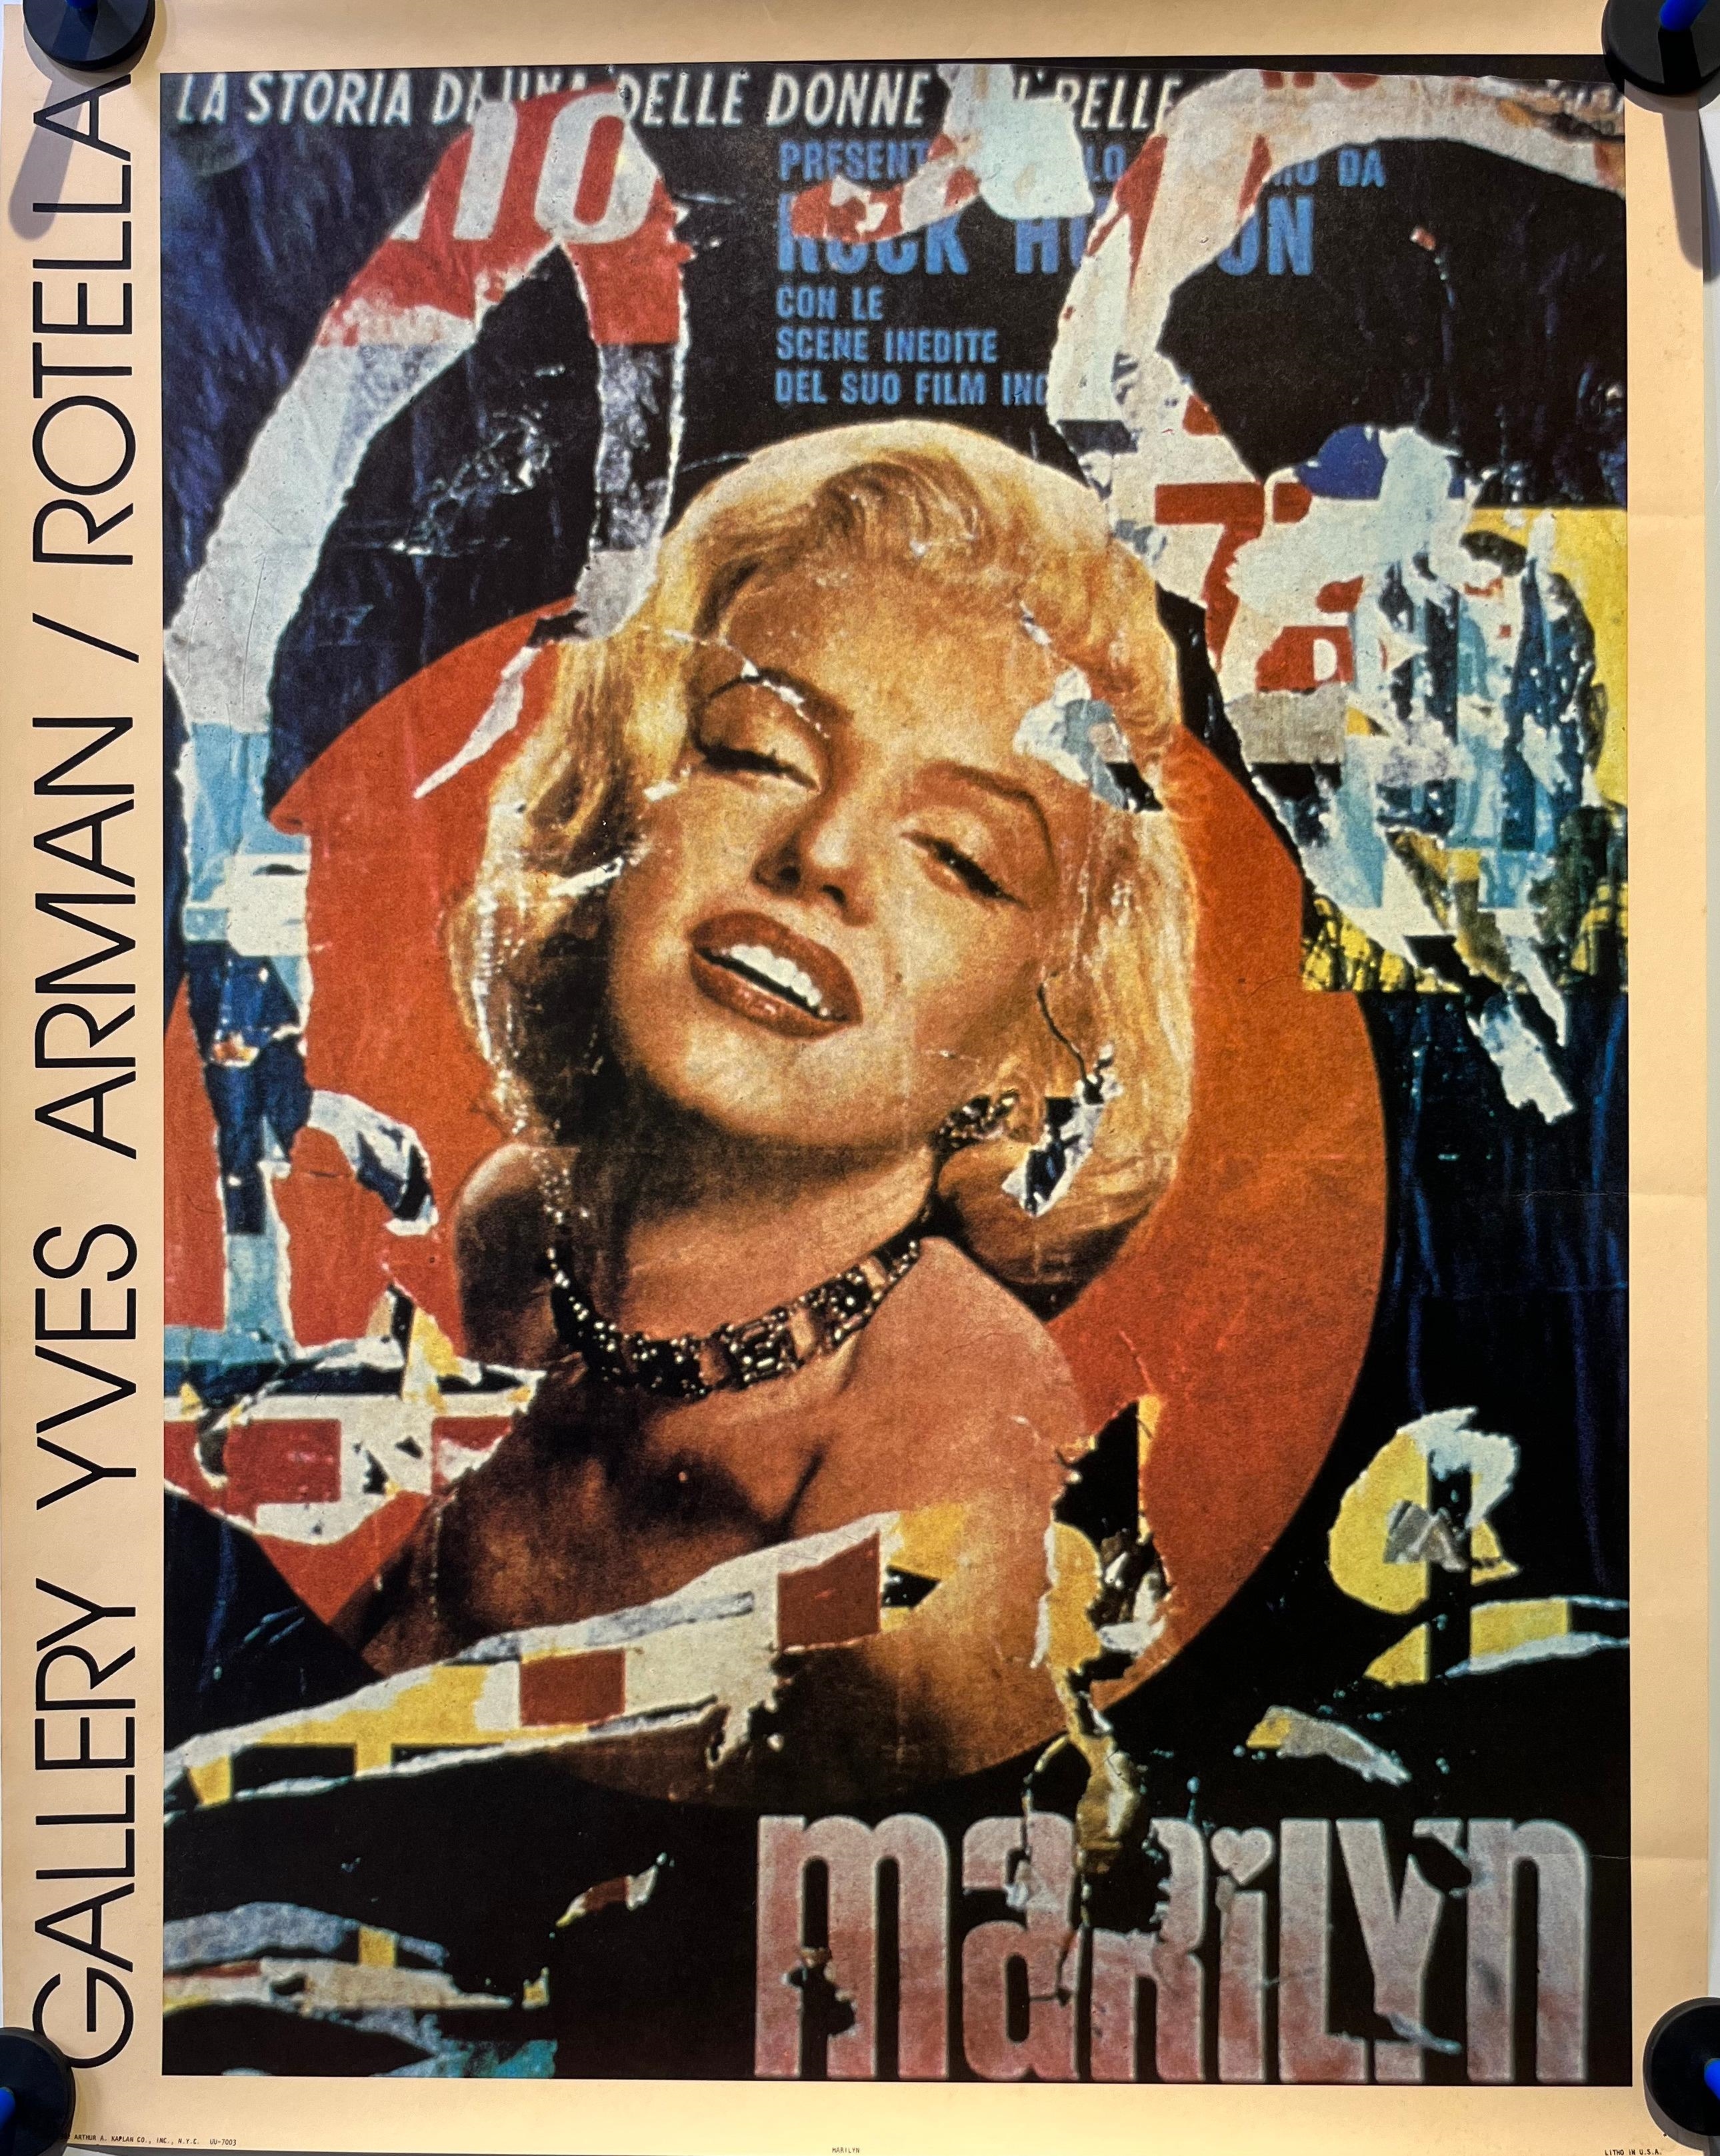 Artwork by Mimmo Rotella, Mimmo Rotella, Italy (1918-2006), Marilyn, Gallery Yves Arman 1982 Original Exhibition Poster, Colour lithograph, Made of Poster, Colour lithograph